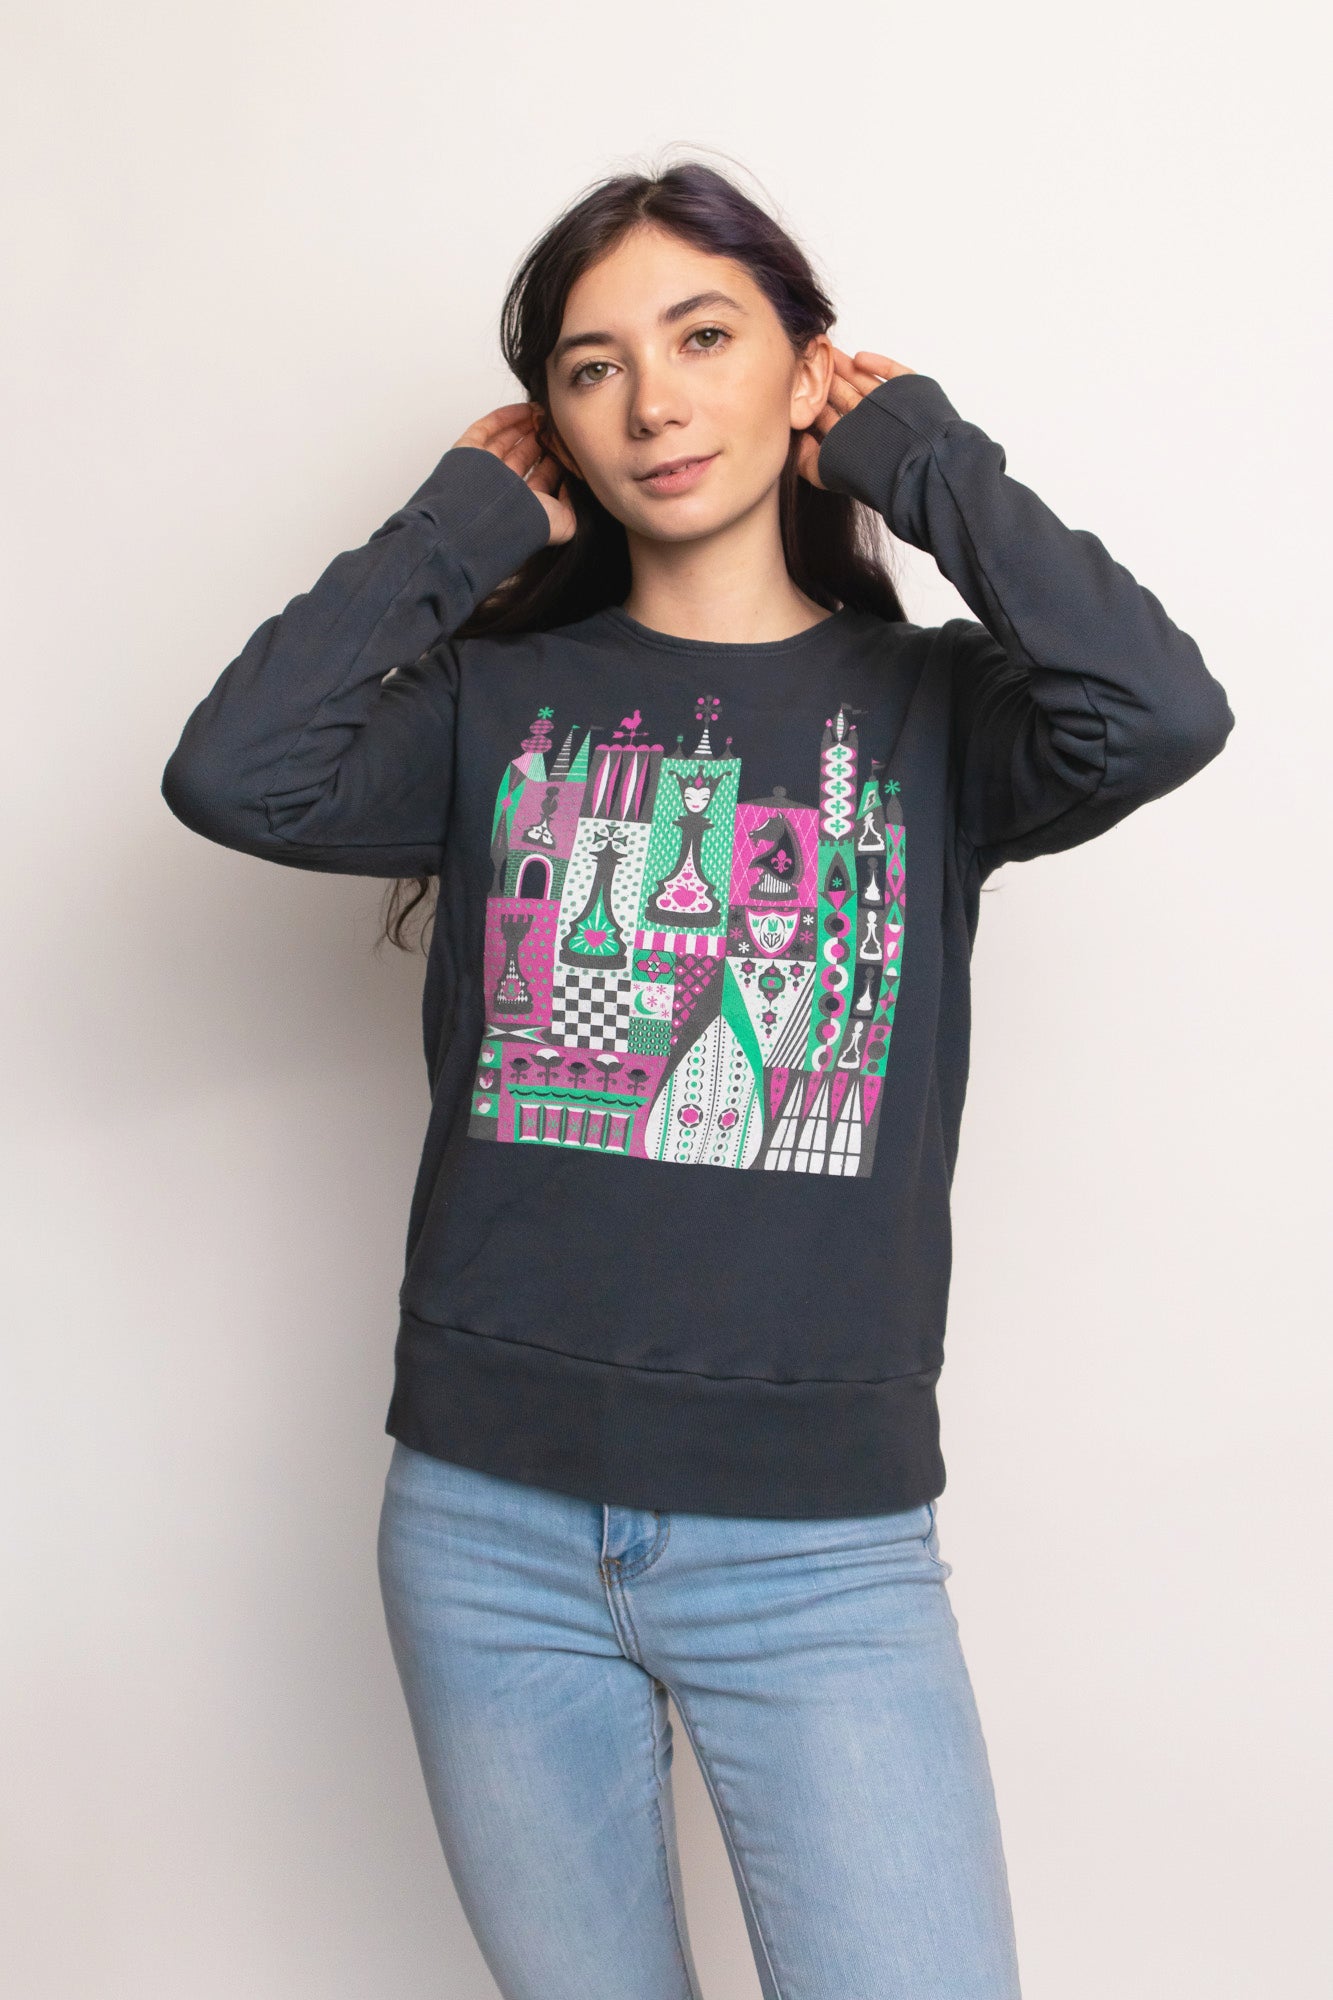 Grey chess print pullover sweatshirt on young woman